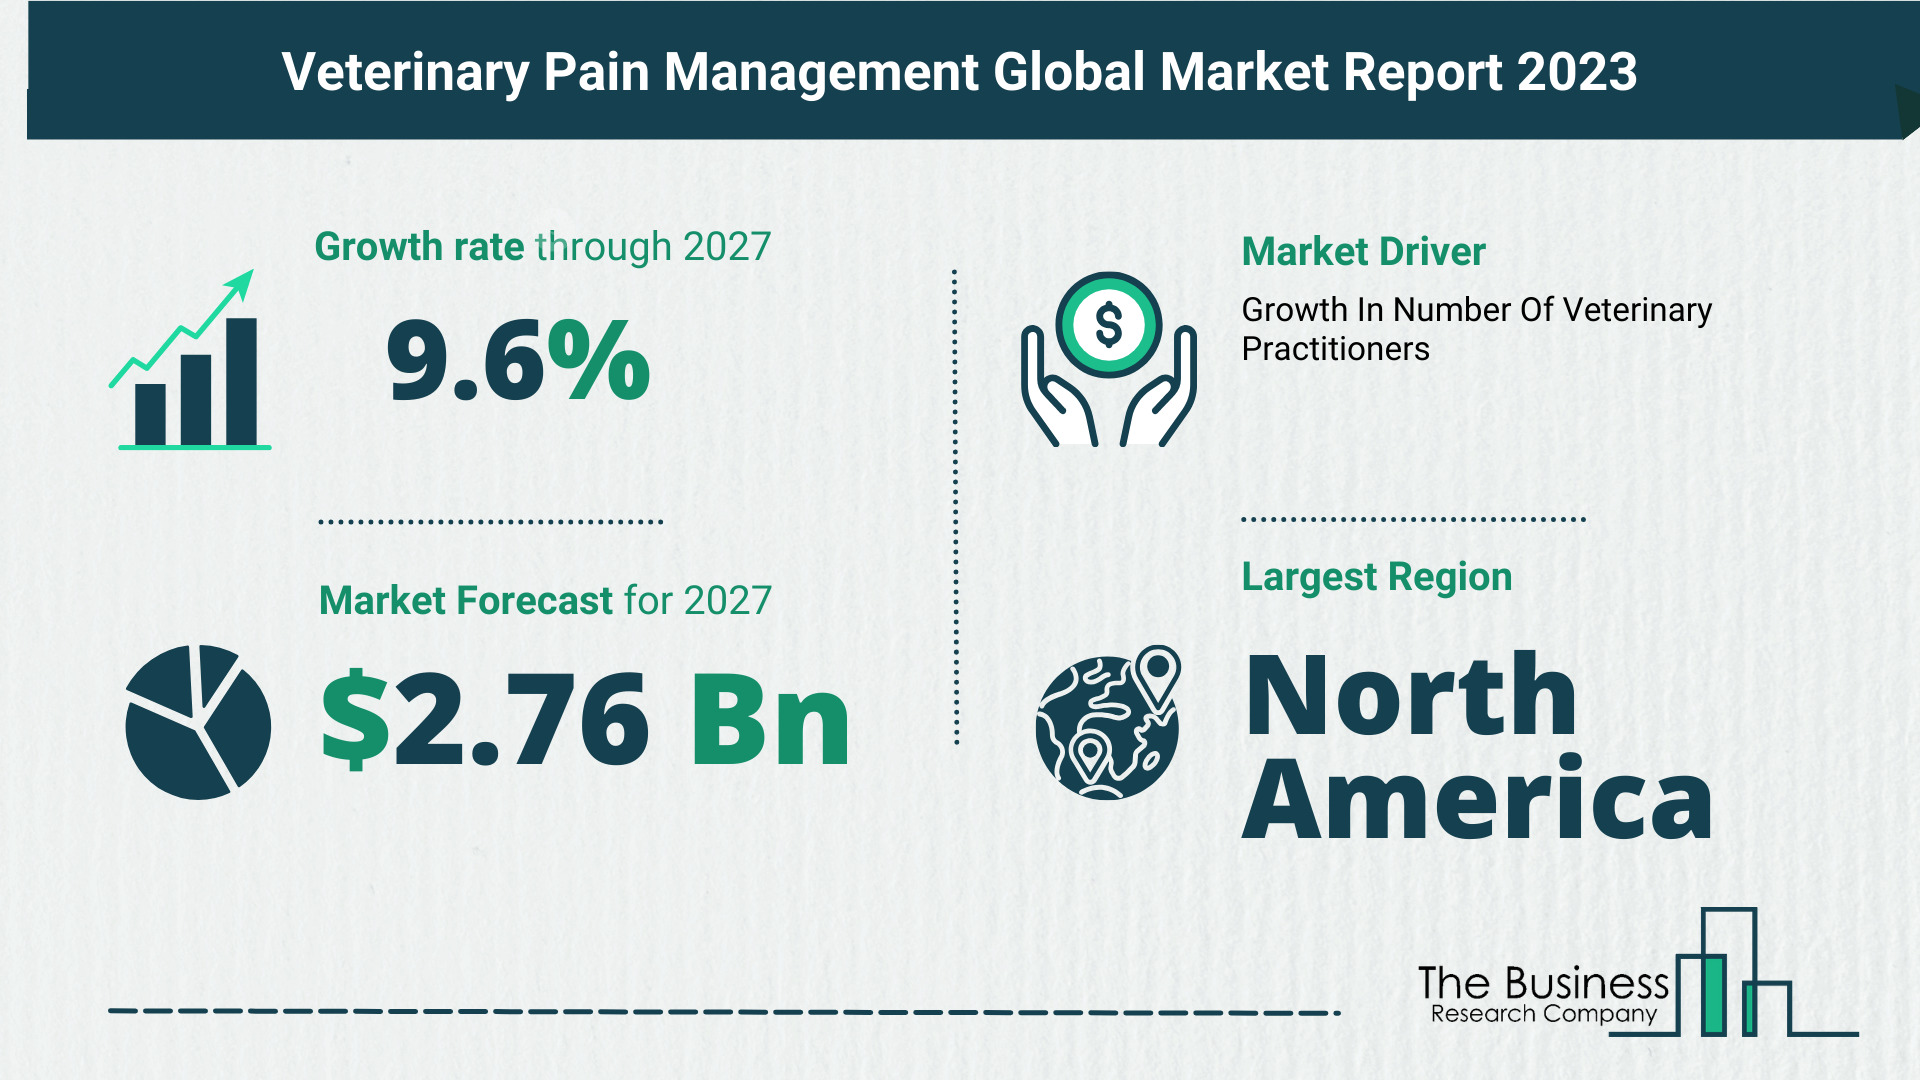 How Is The Veterinary Pain Management Market Expected To Grow Through 2023-2032